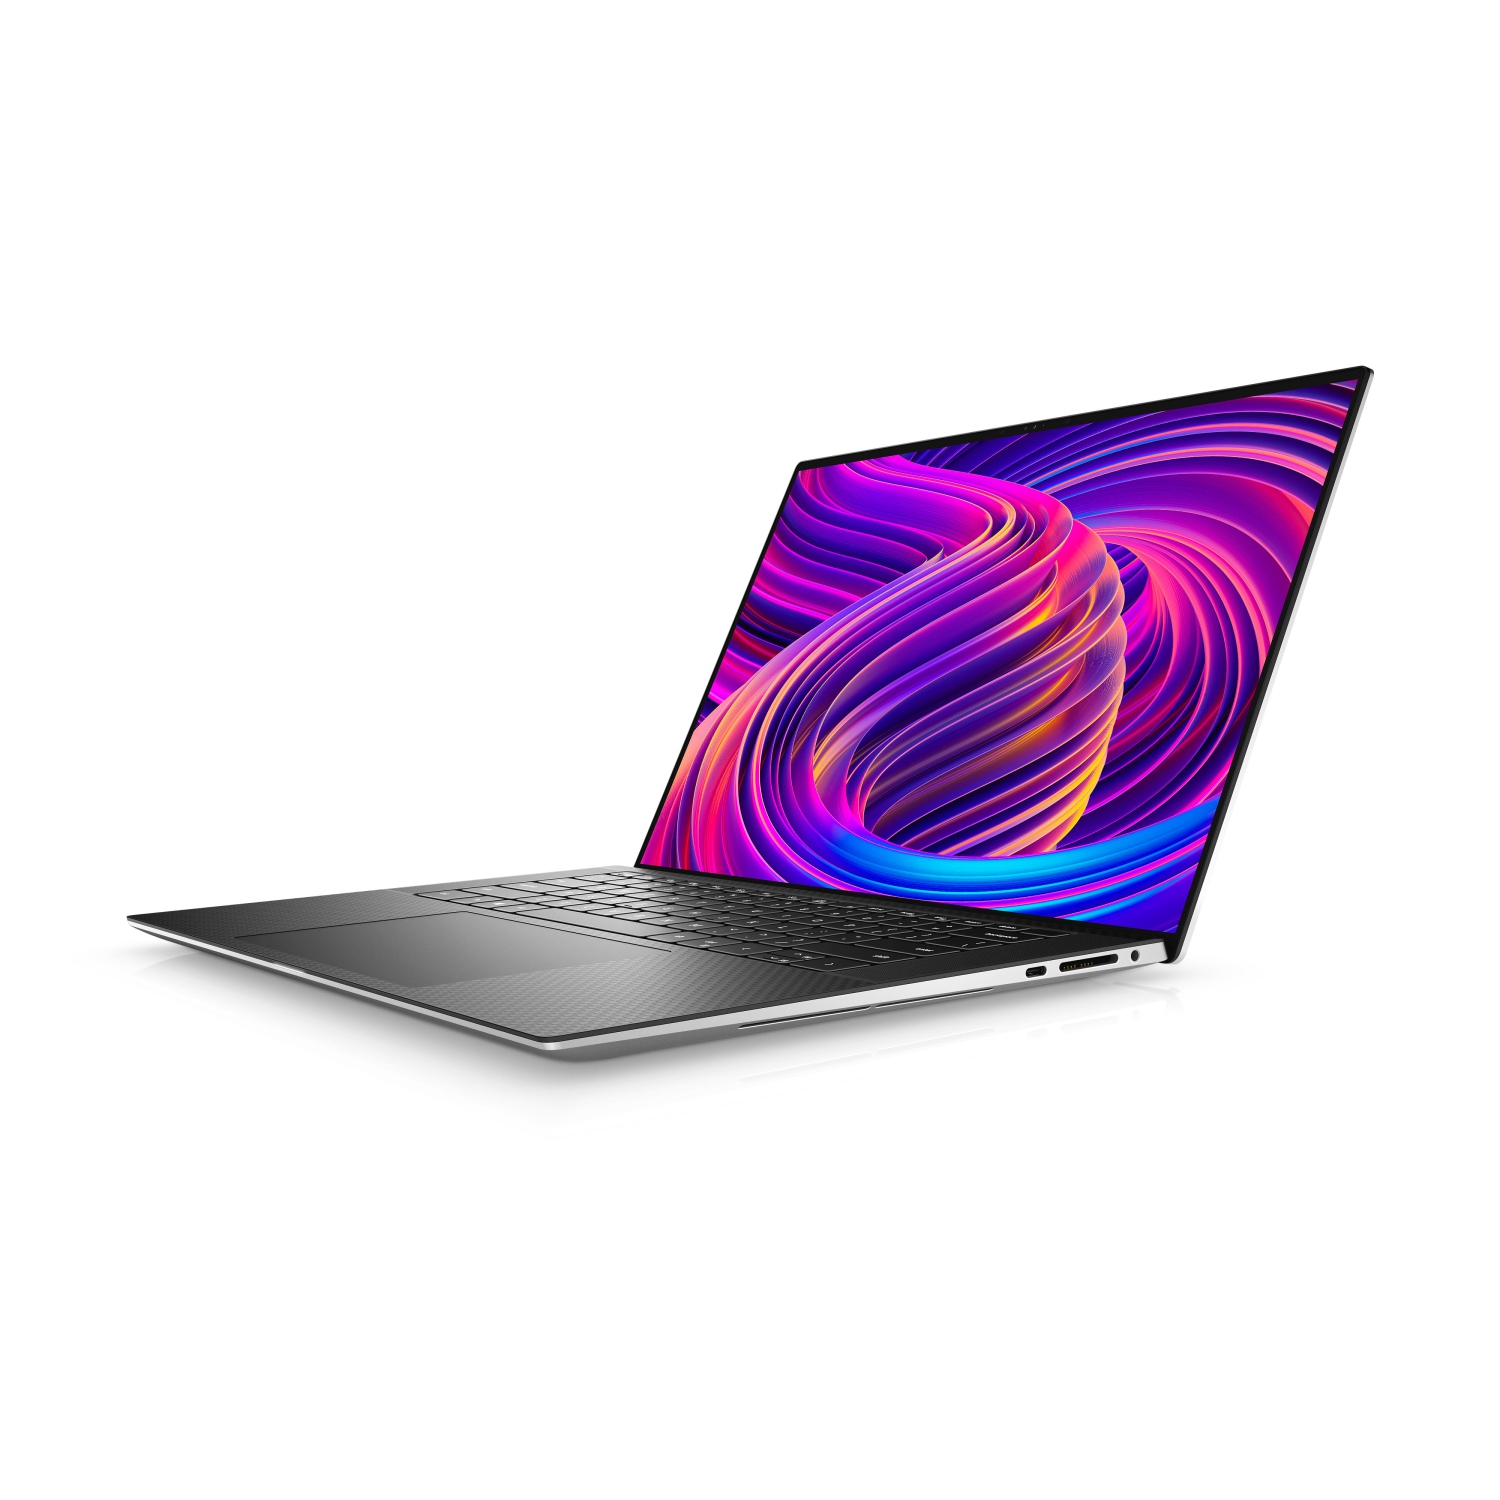 Refurbished (Excellent) - Dell XPS 15 9510 Laptop (2021), 15.6" 4K Touch, Core i9 - 1TB SSD - 16GB RAM - 3050 Ti, 8 Cores @ 4.9 GHz - 11th Gen CPU Certified Refurbished